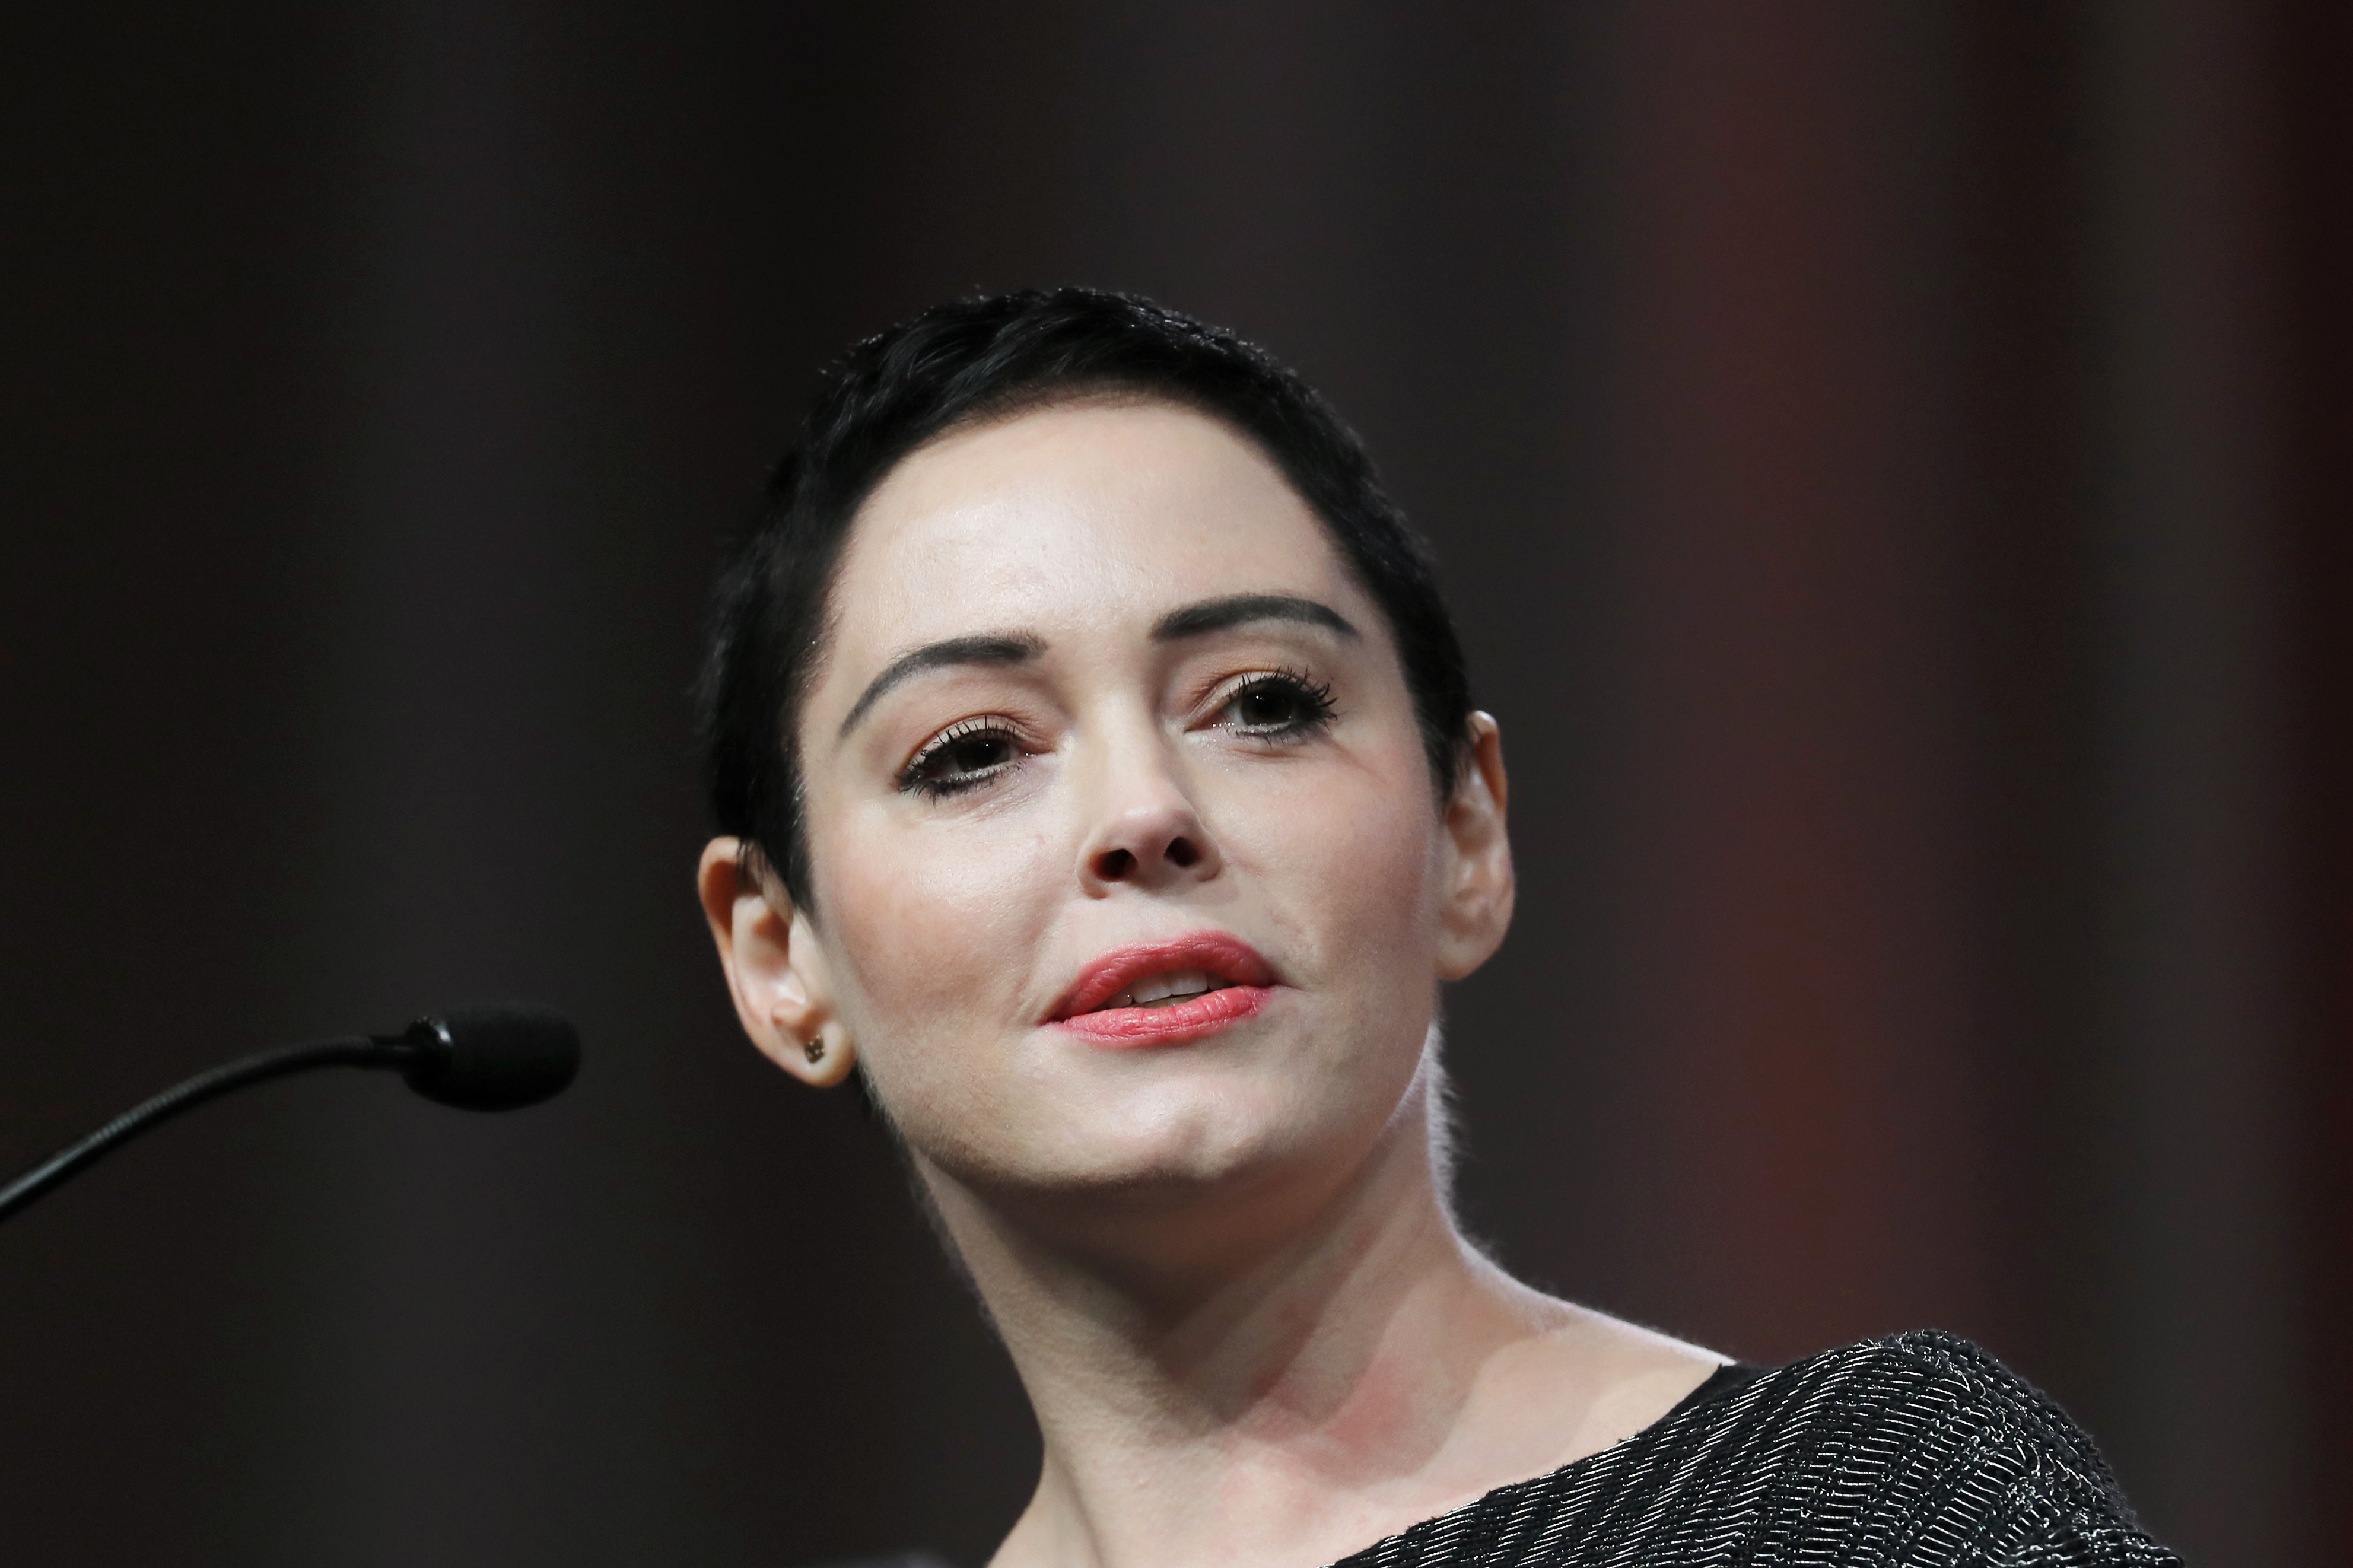 Actress Rose McGowan speaks at the inaugural Women's Convention in Detroit on Oct. 27, 2017. (Paul Sancya—AP)